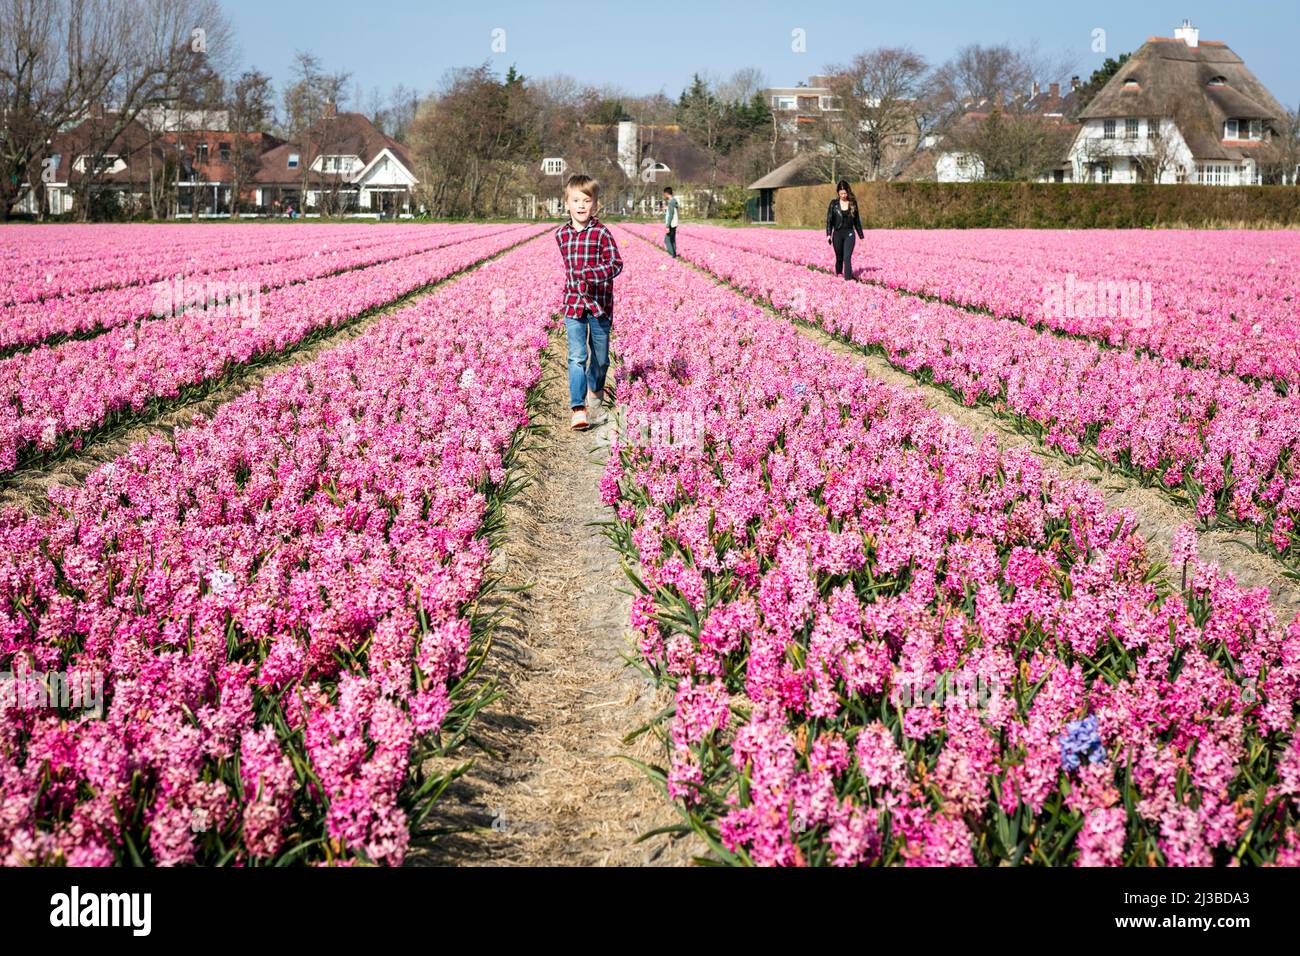 A young boy walks between rows of Hyacinths (Hyacinthus Orientalis), with buildings in the background, on an early Spring day in the Dutch flower fields around Lisse in the Netherlands. Stock Photo